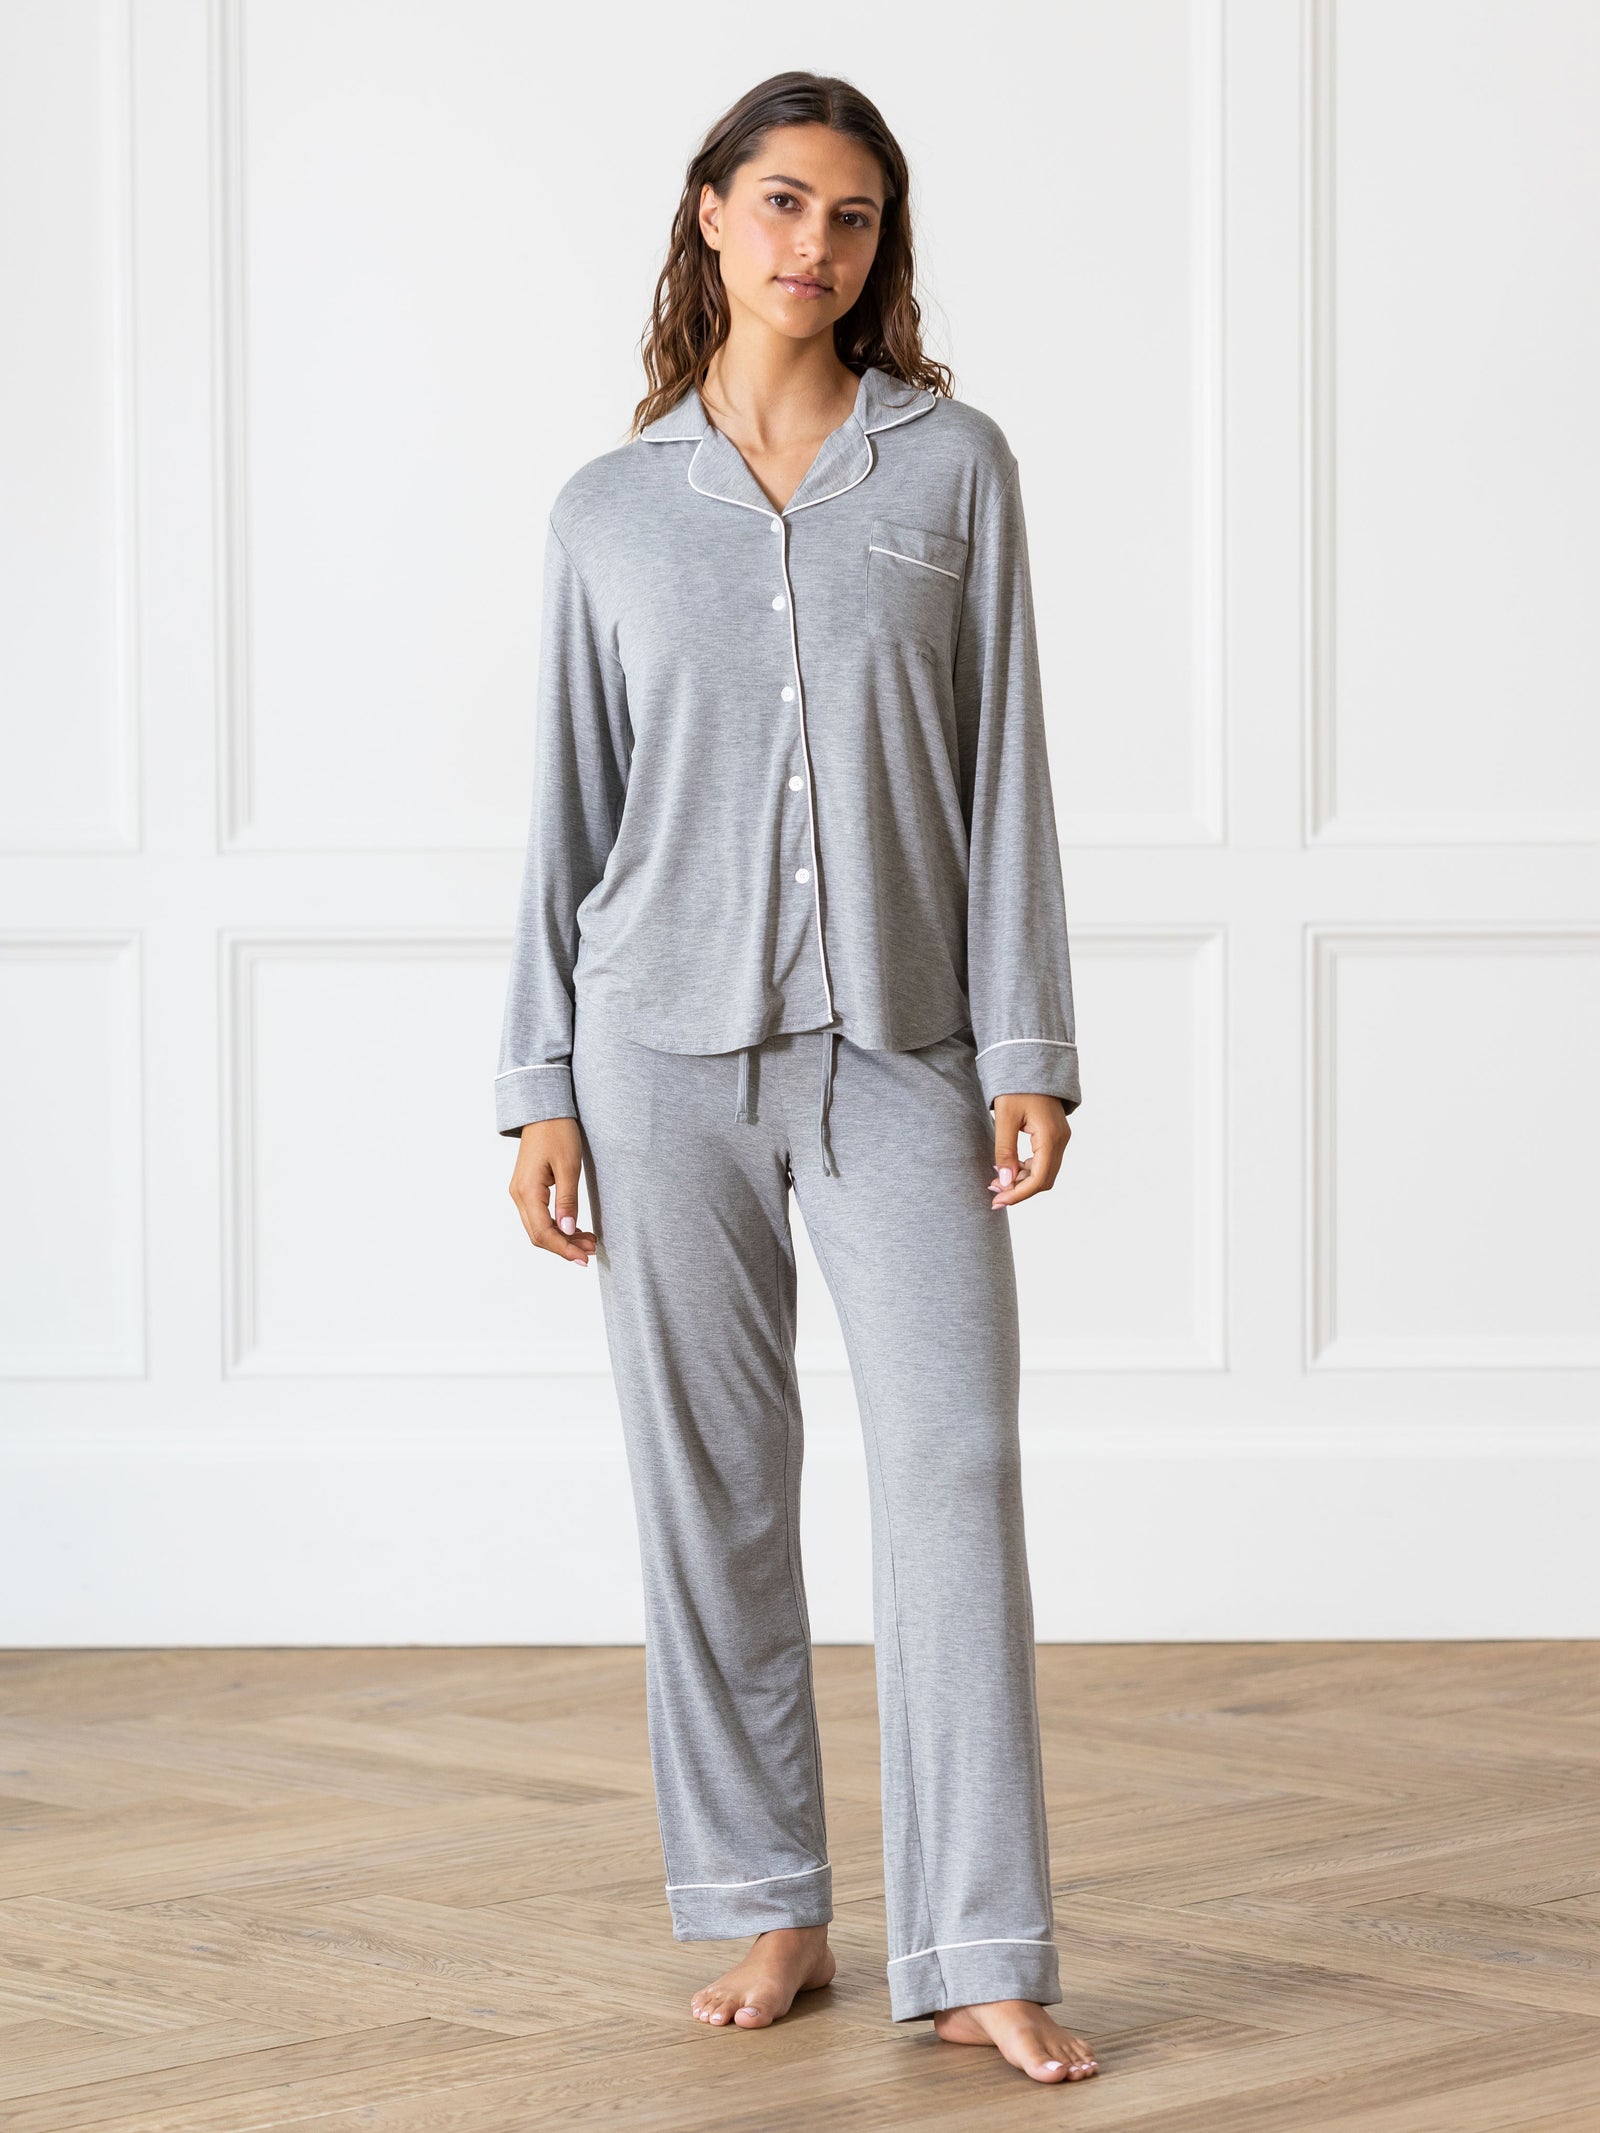 Grey Long Sleeve Pajama Set modeled by a woman. The photo was taken in a high contrast setting, showing off the colors and lines of the pajamas. 